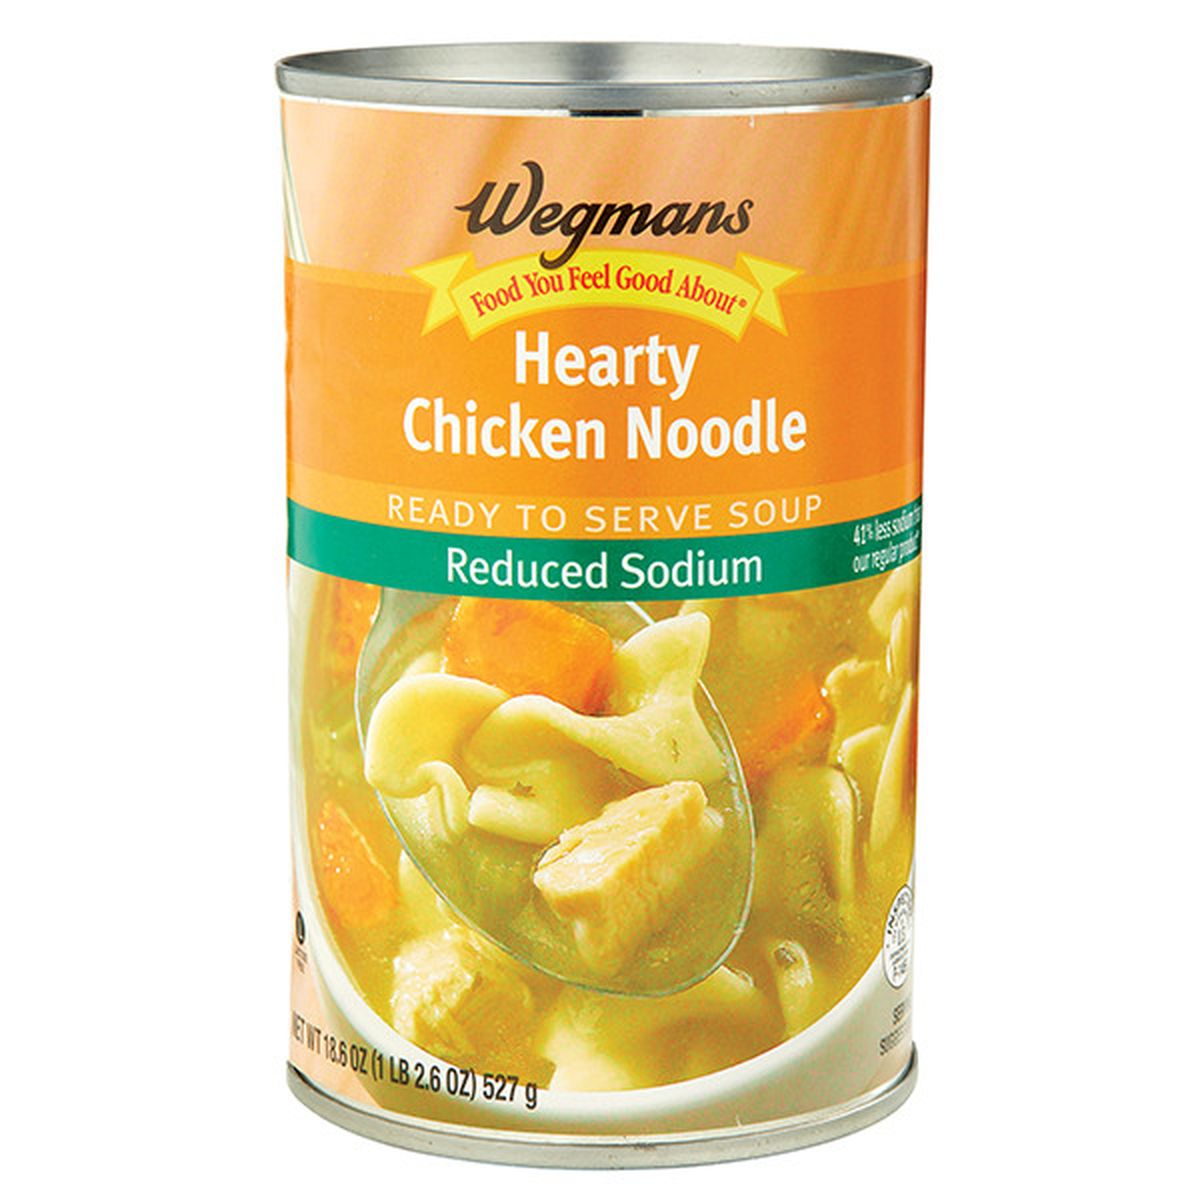 Calories in Wegmans Reduced Sodium Hearty Chicken Noodle Soup